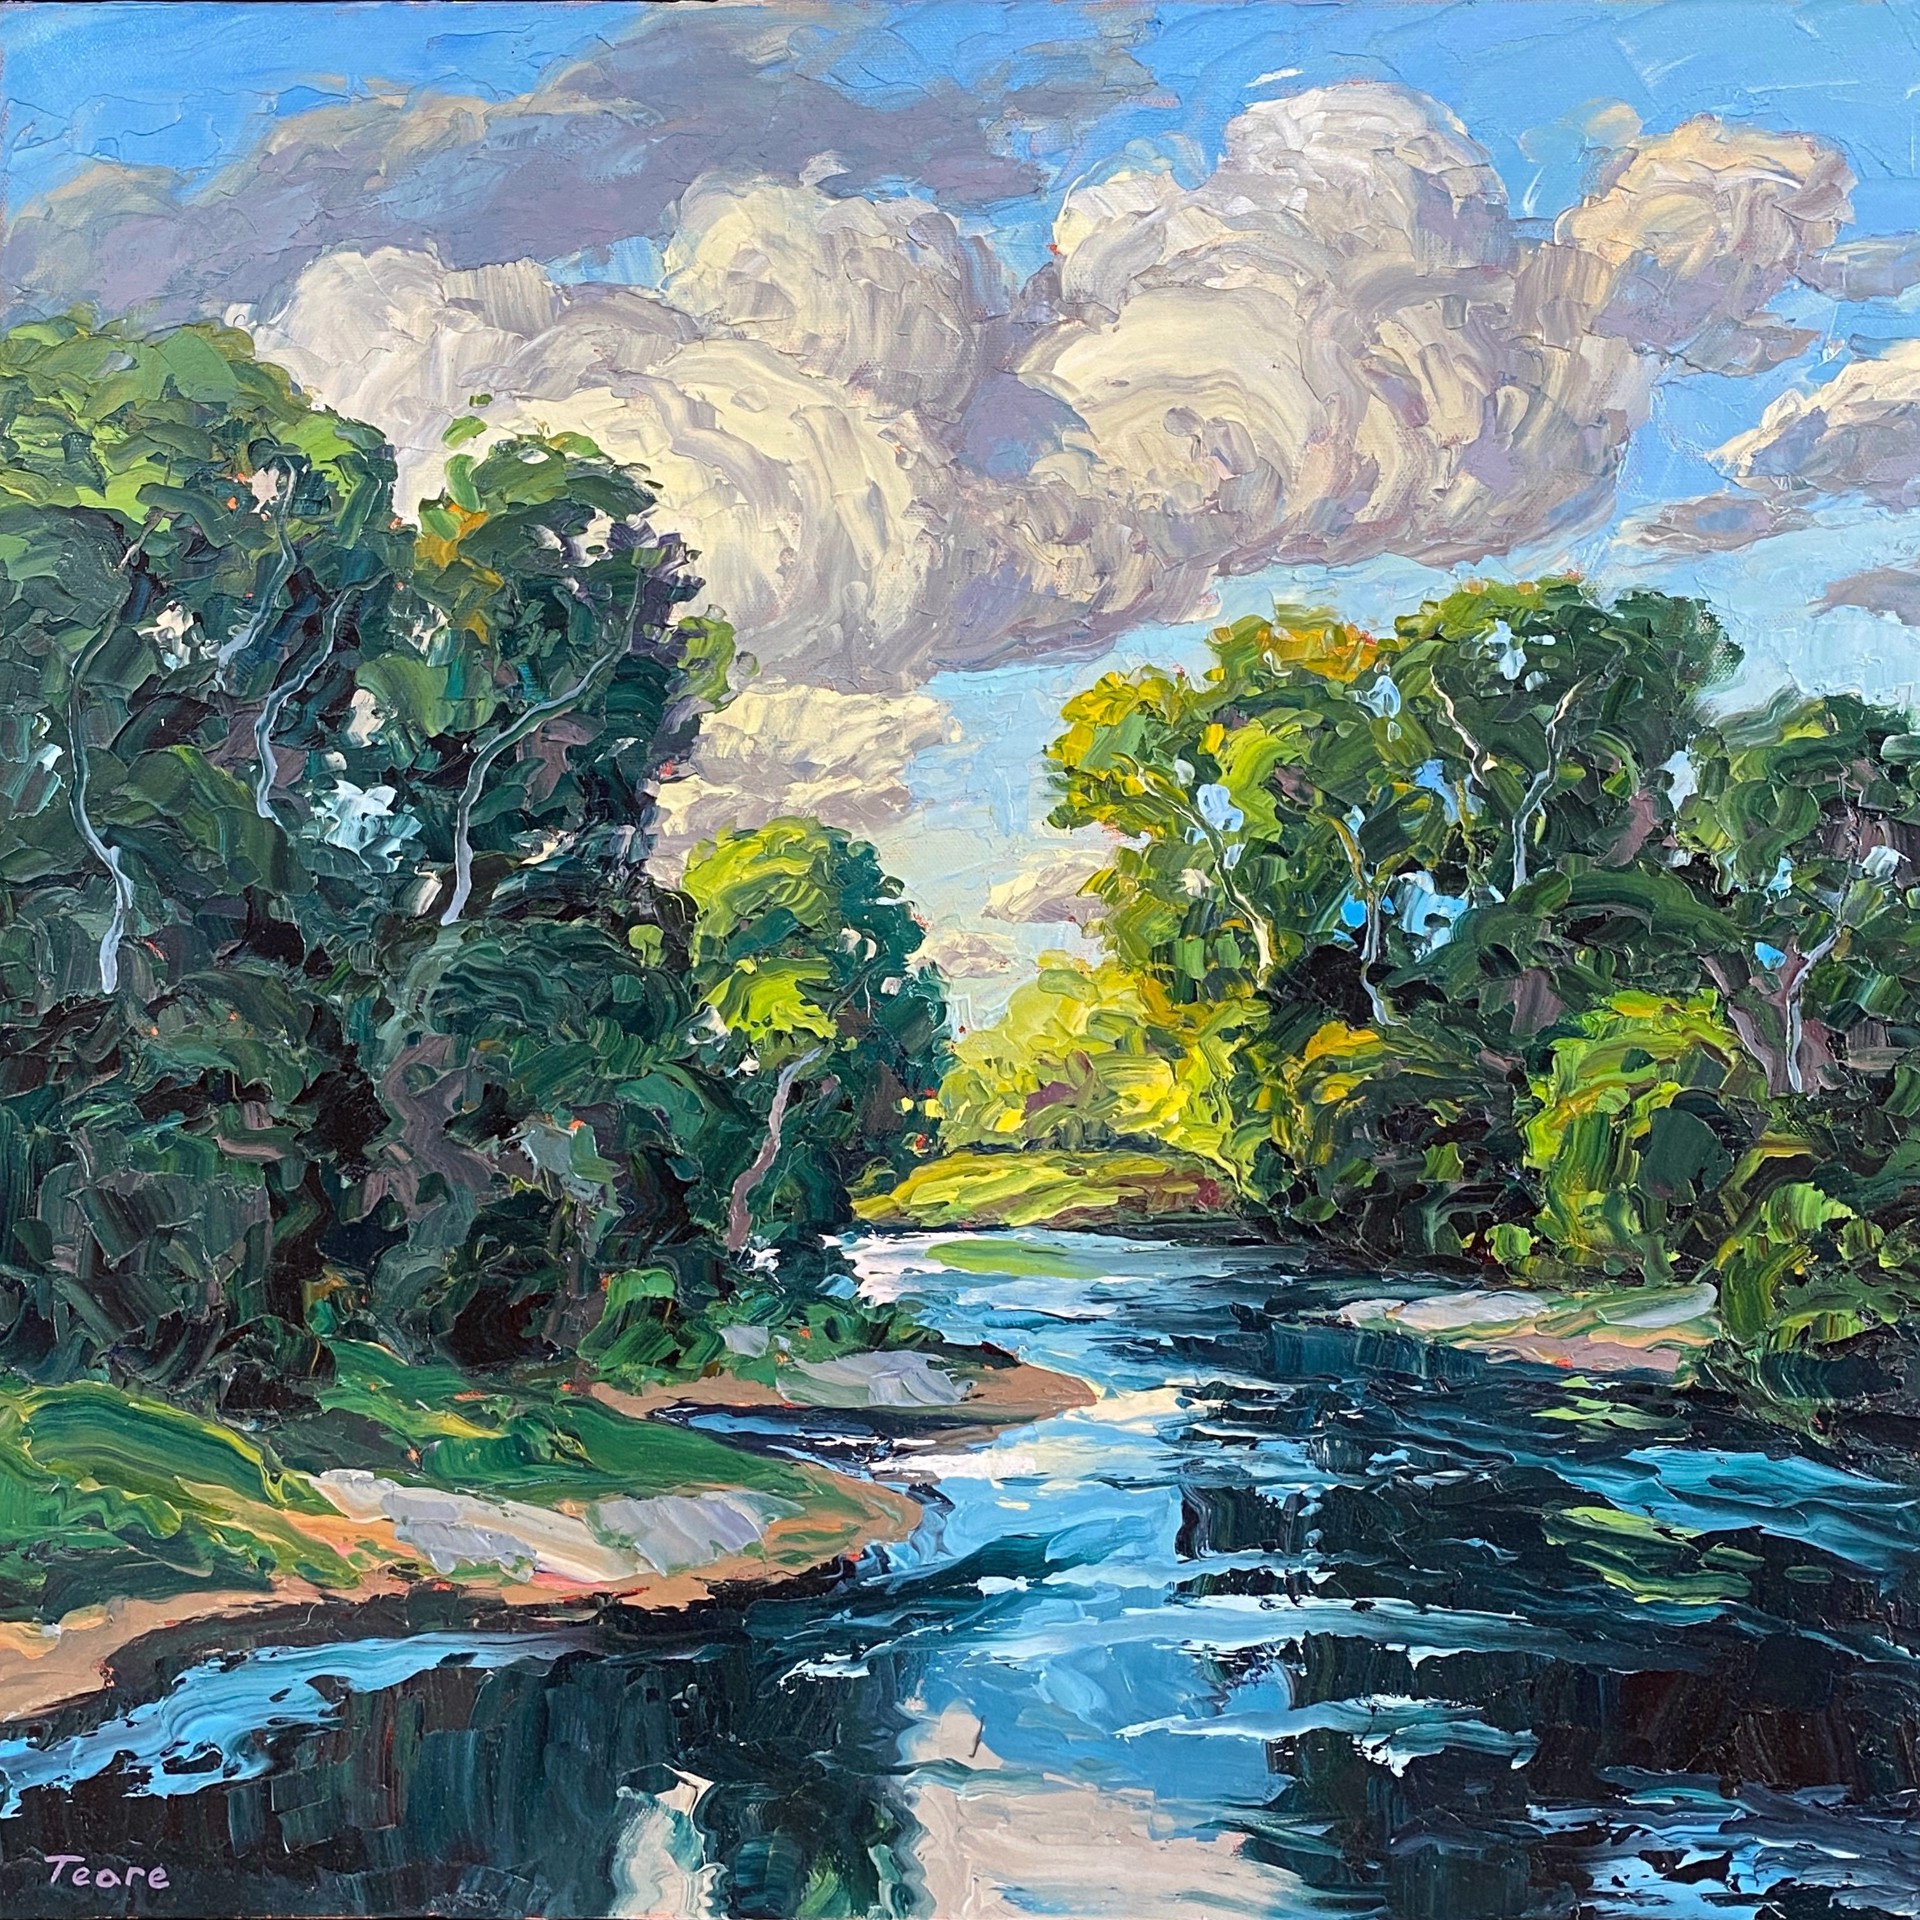 Summer Afternoon (Smoky River) by Brad Teare